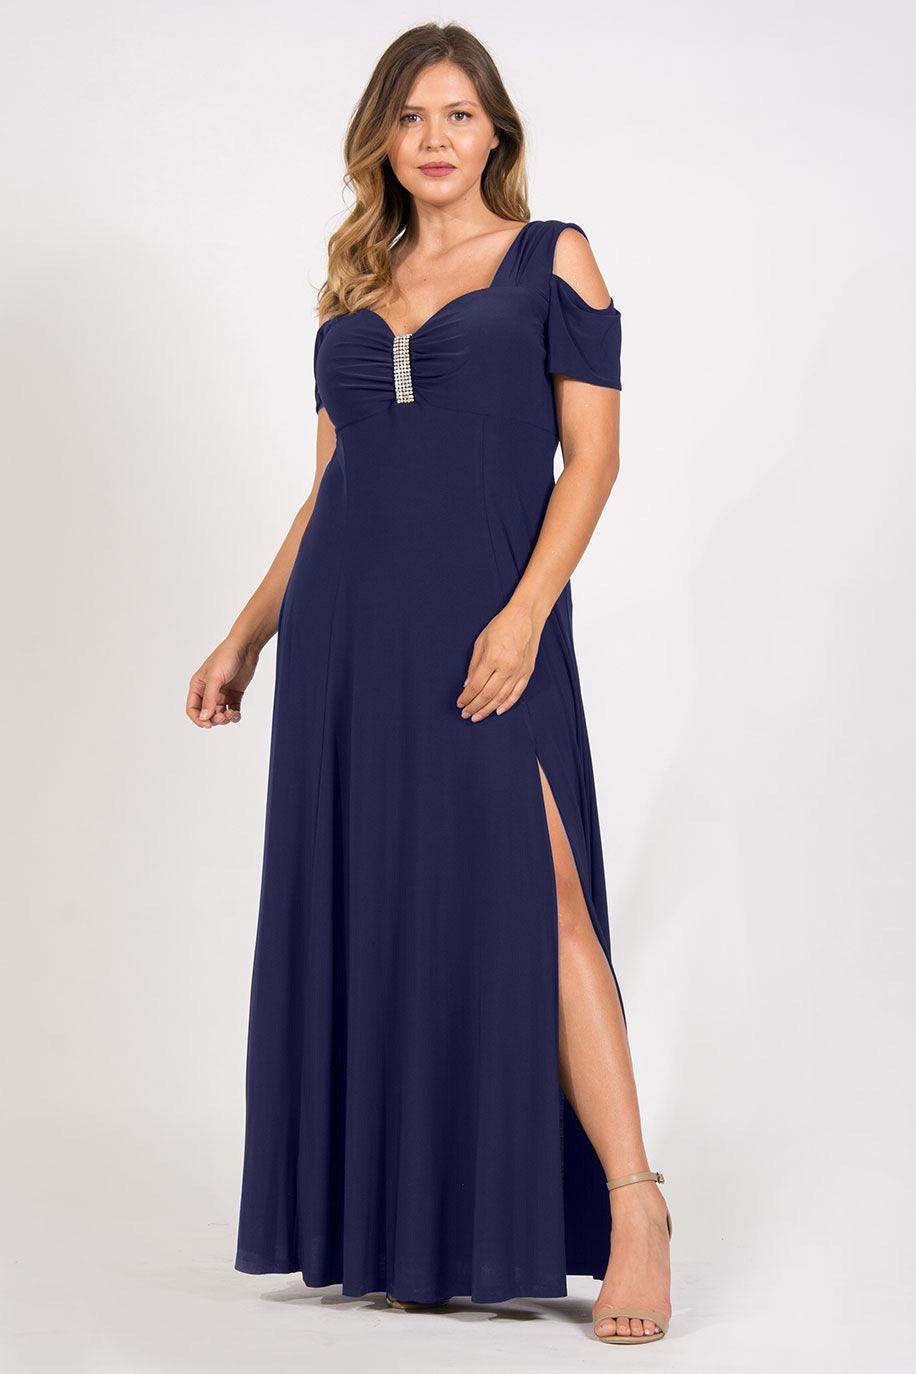 Navy R&M Richards 1367 Evening Long Formal Dress for $45.99 – The Dress  Outlet